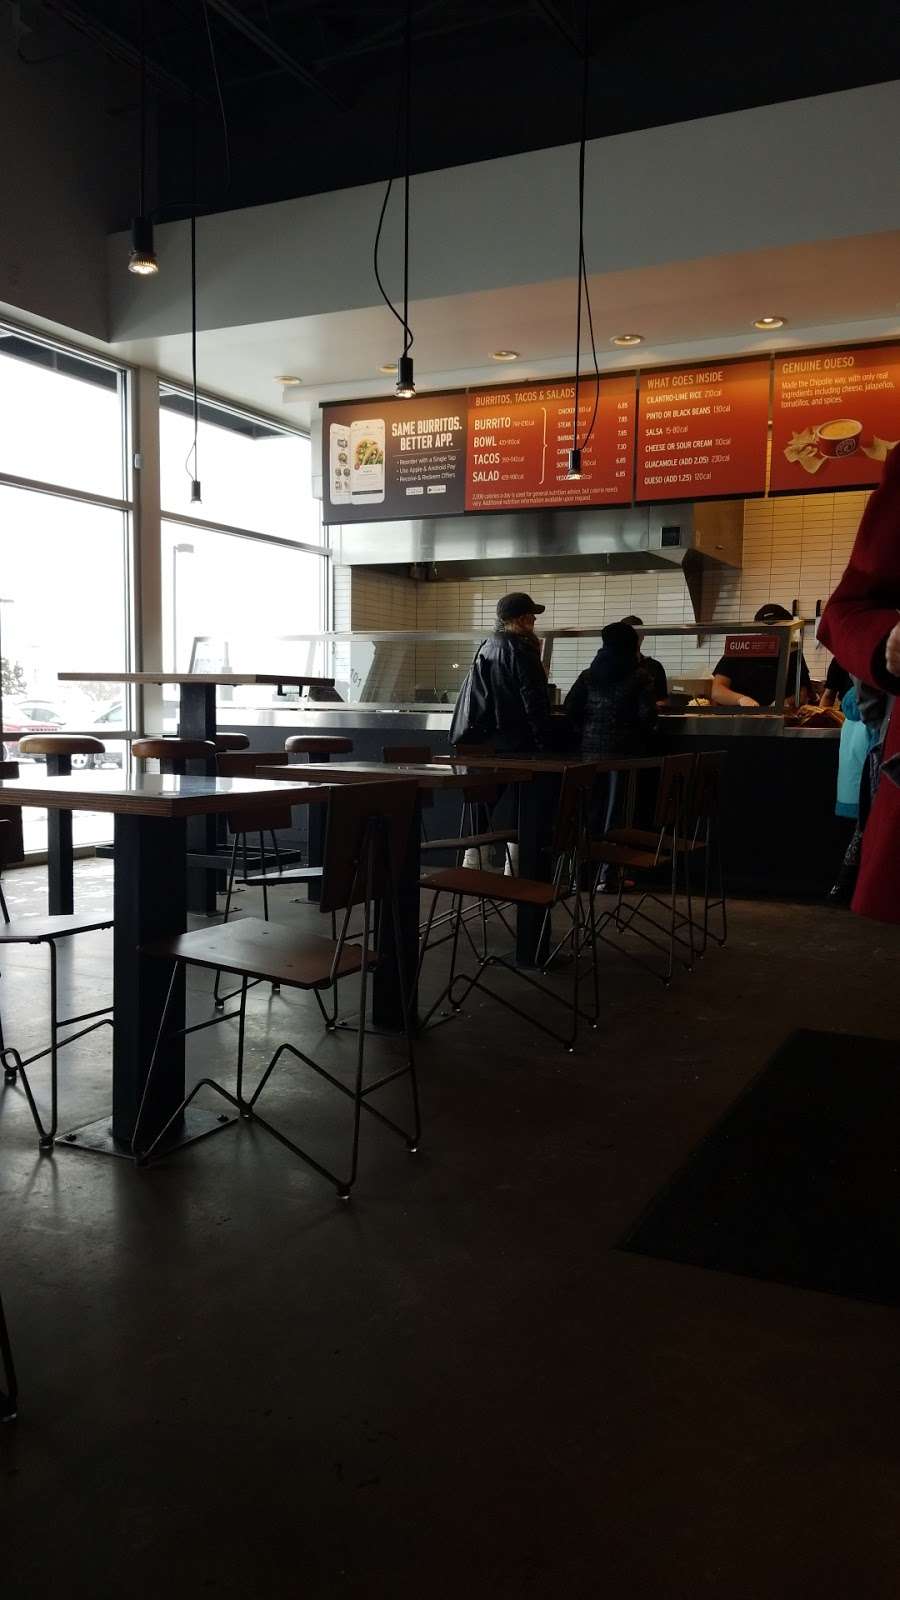 Chipotle Mexican Grill | 10343 Indianapolis Blvd, Highland, IN 46322, USA | Phone: (219) 924-2654